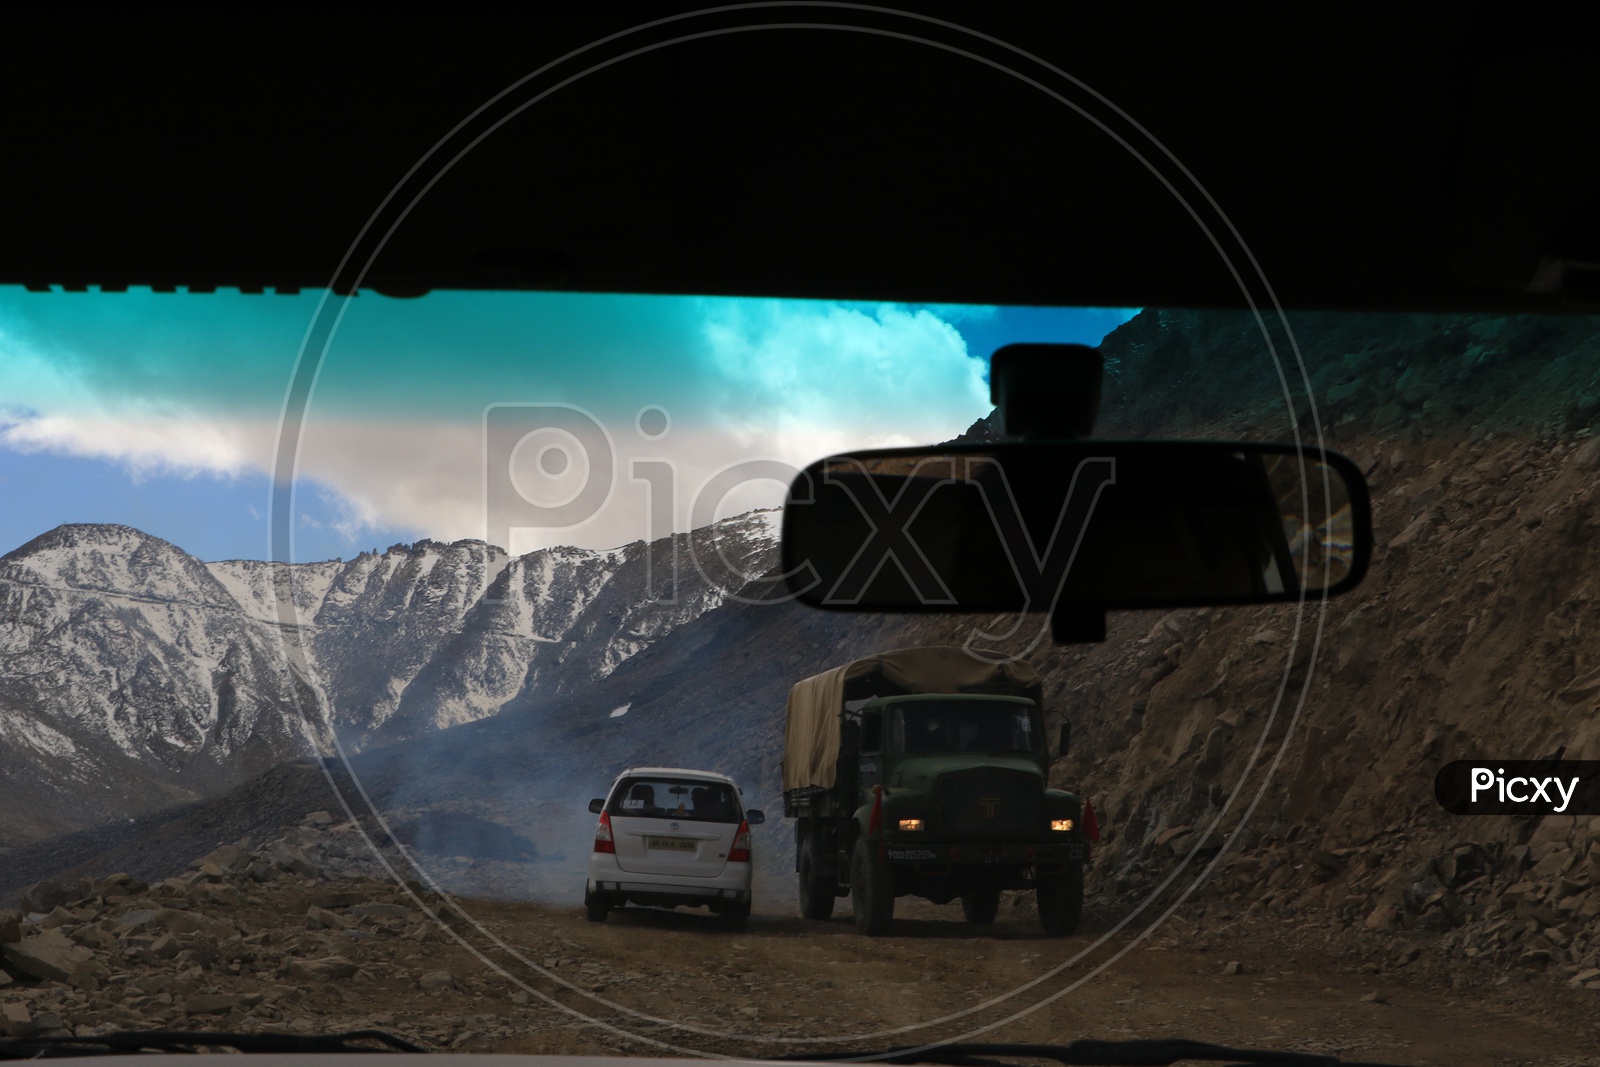 Military van moving on leh roads with beautiful snow capped mountains in the background